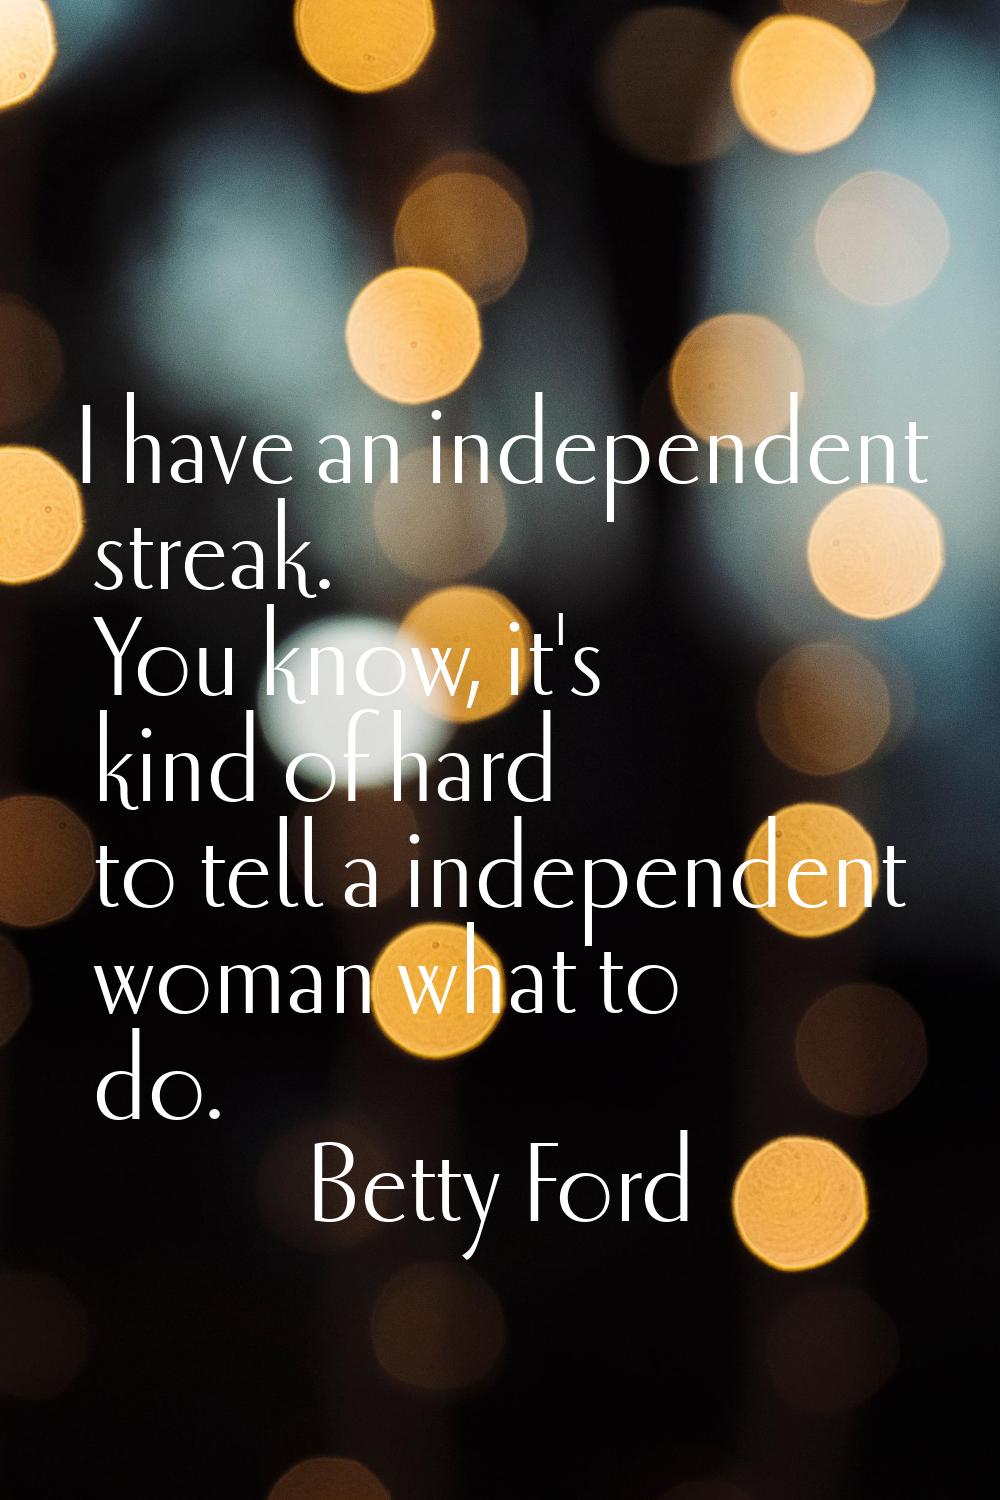 I have an independent streak. You know, it's kind of hard to tell a independent woman what to do.